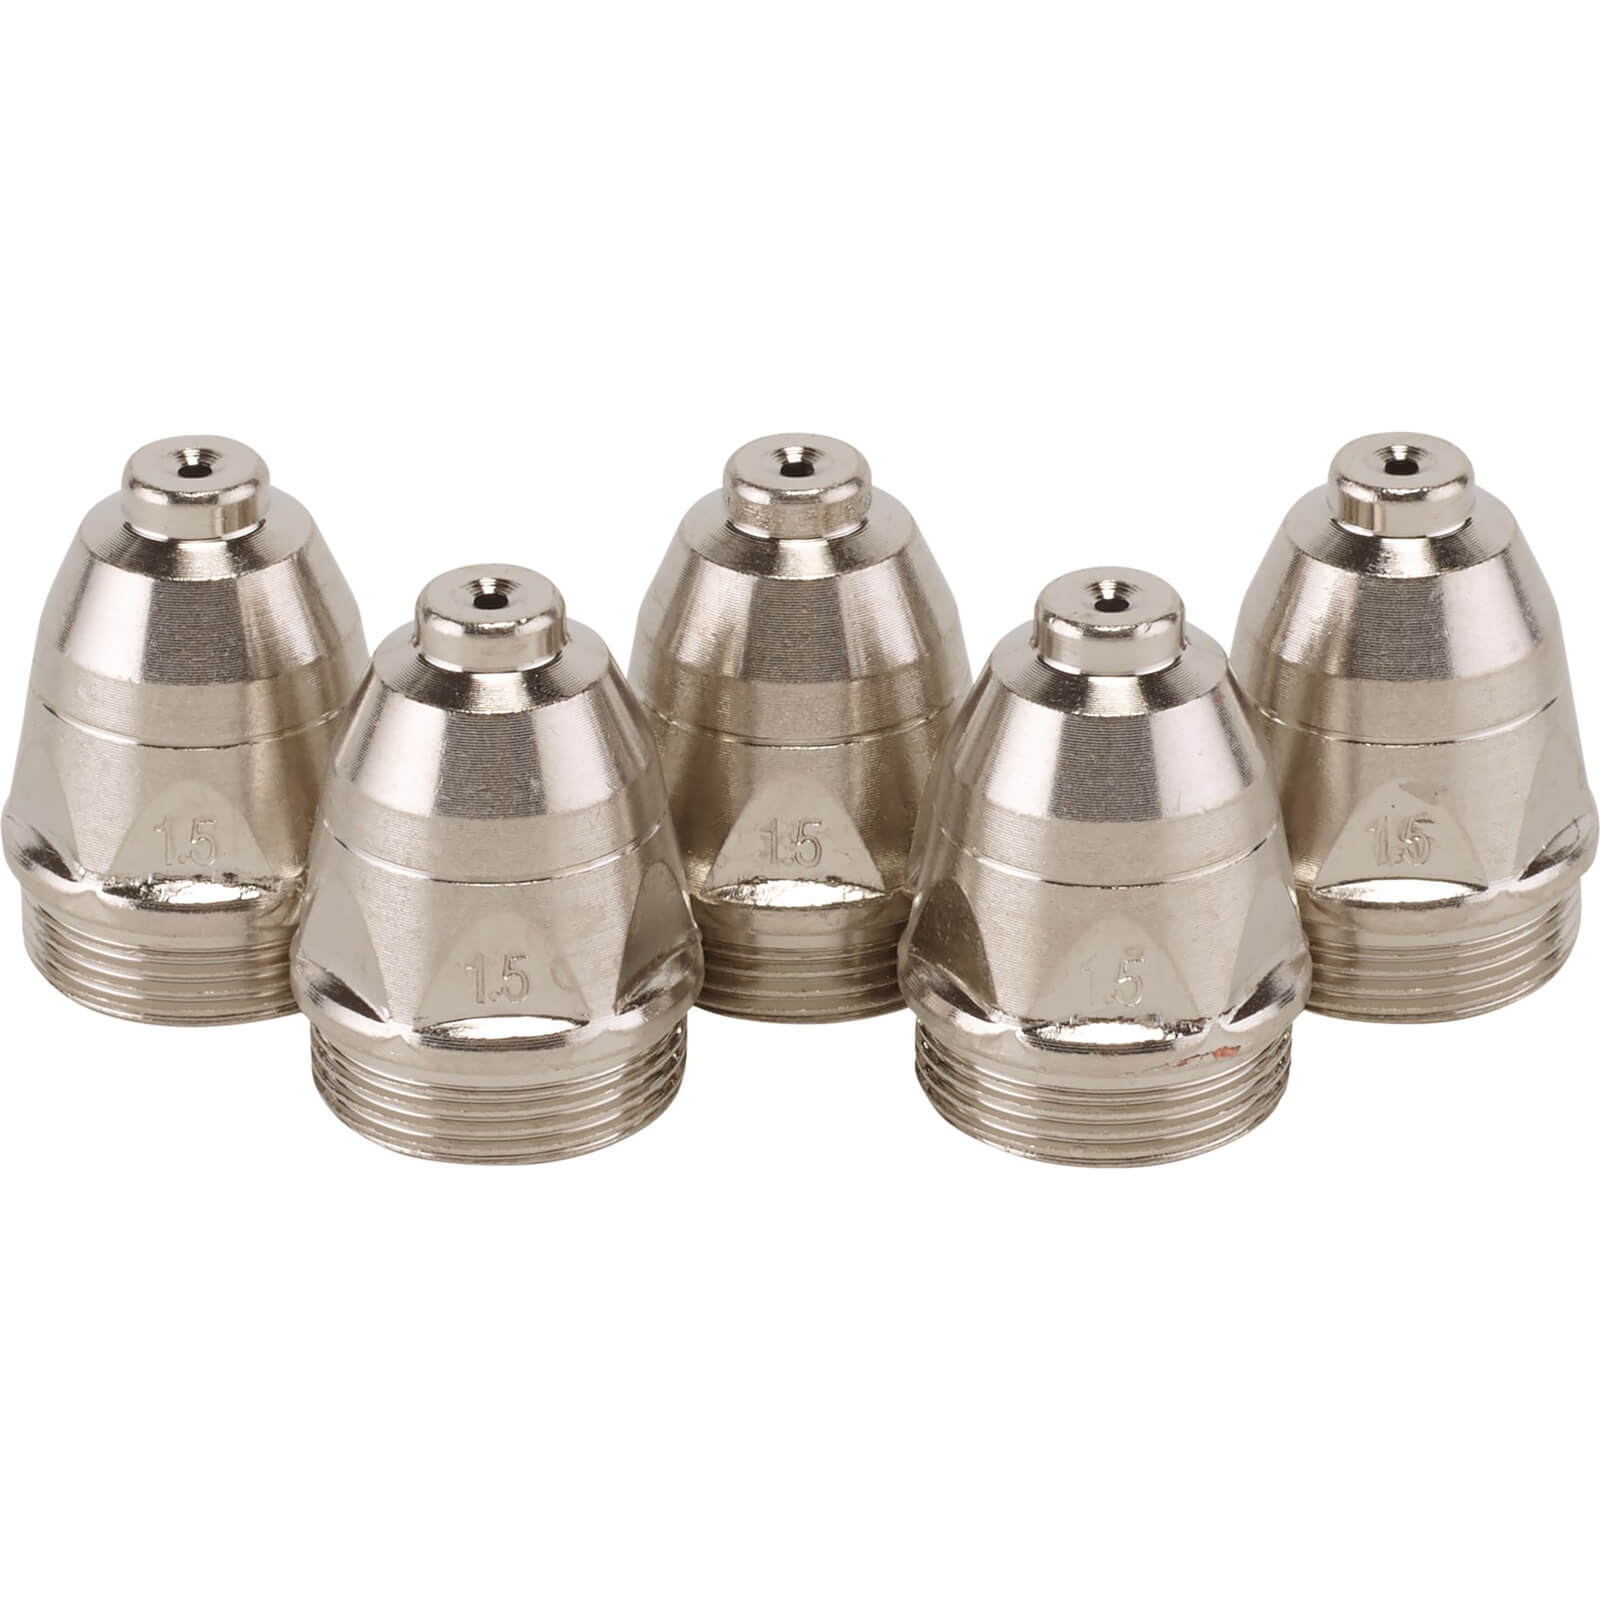 Image of Draper Nozzle for 03358 Plasma Cutting Torch Pack of 5